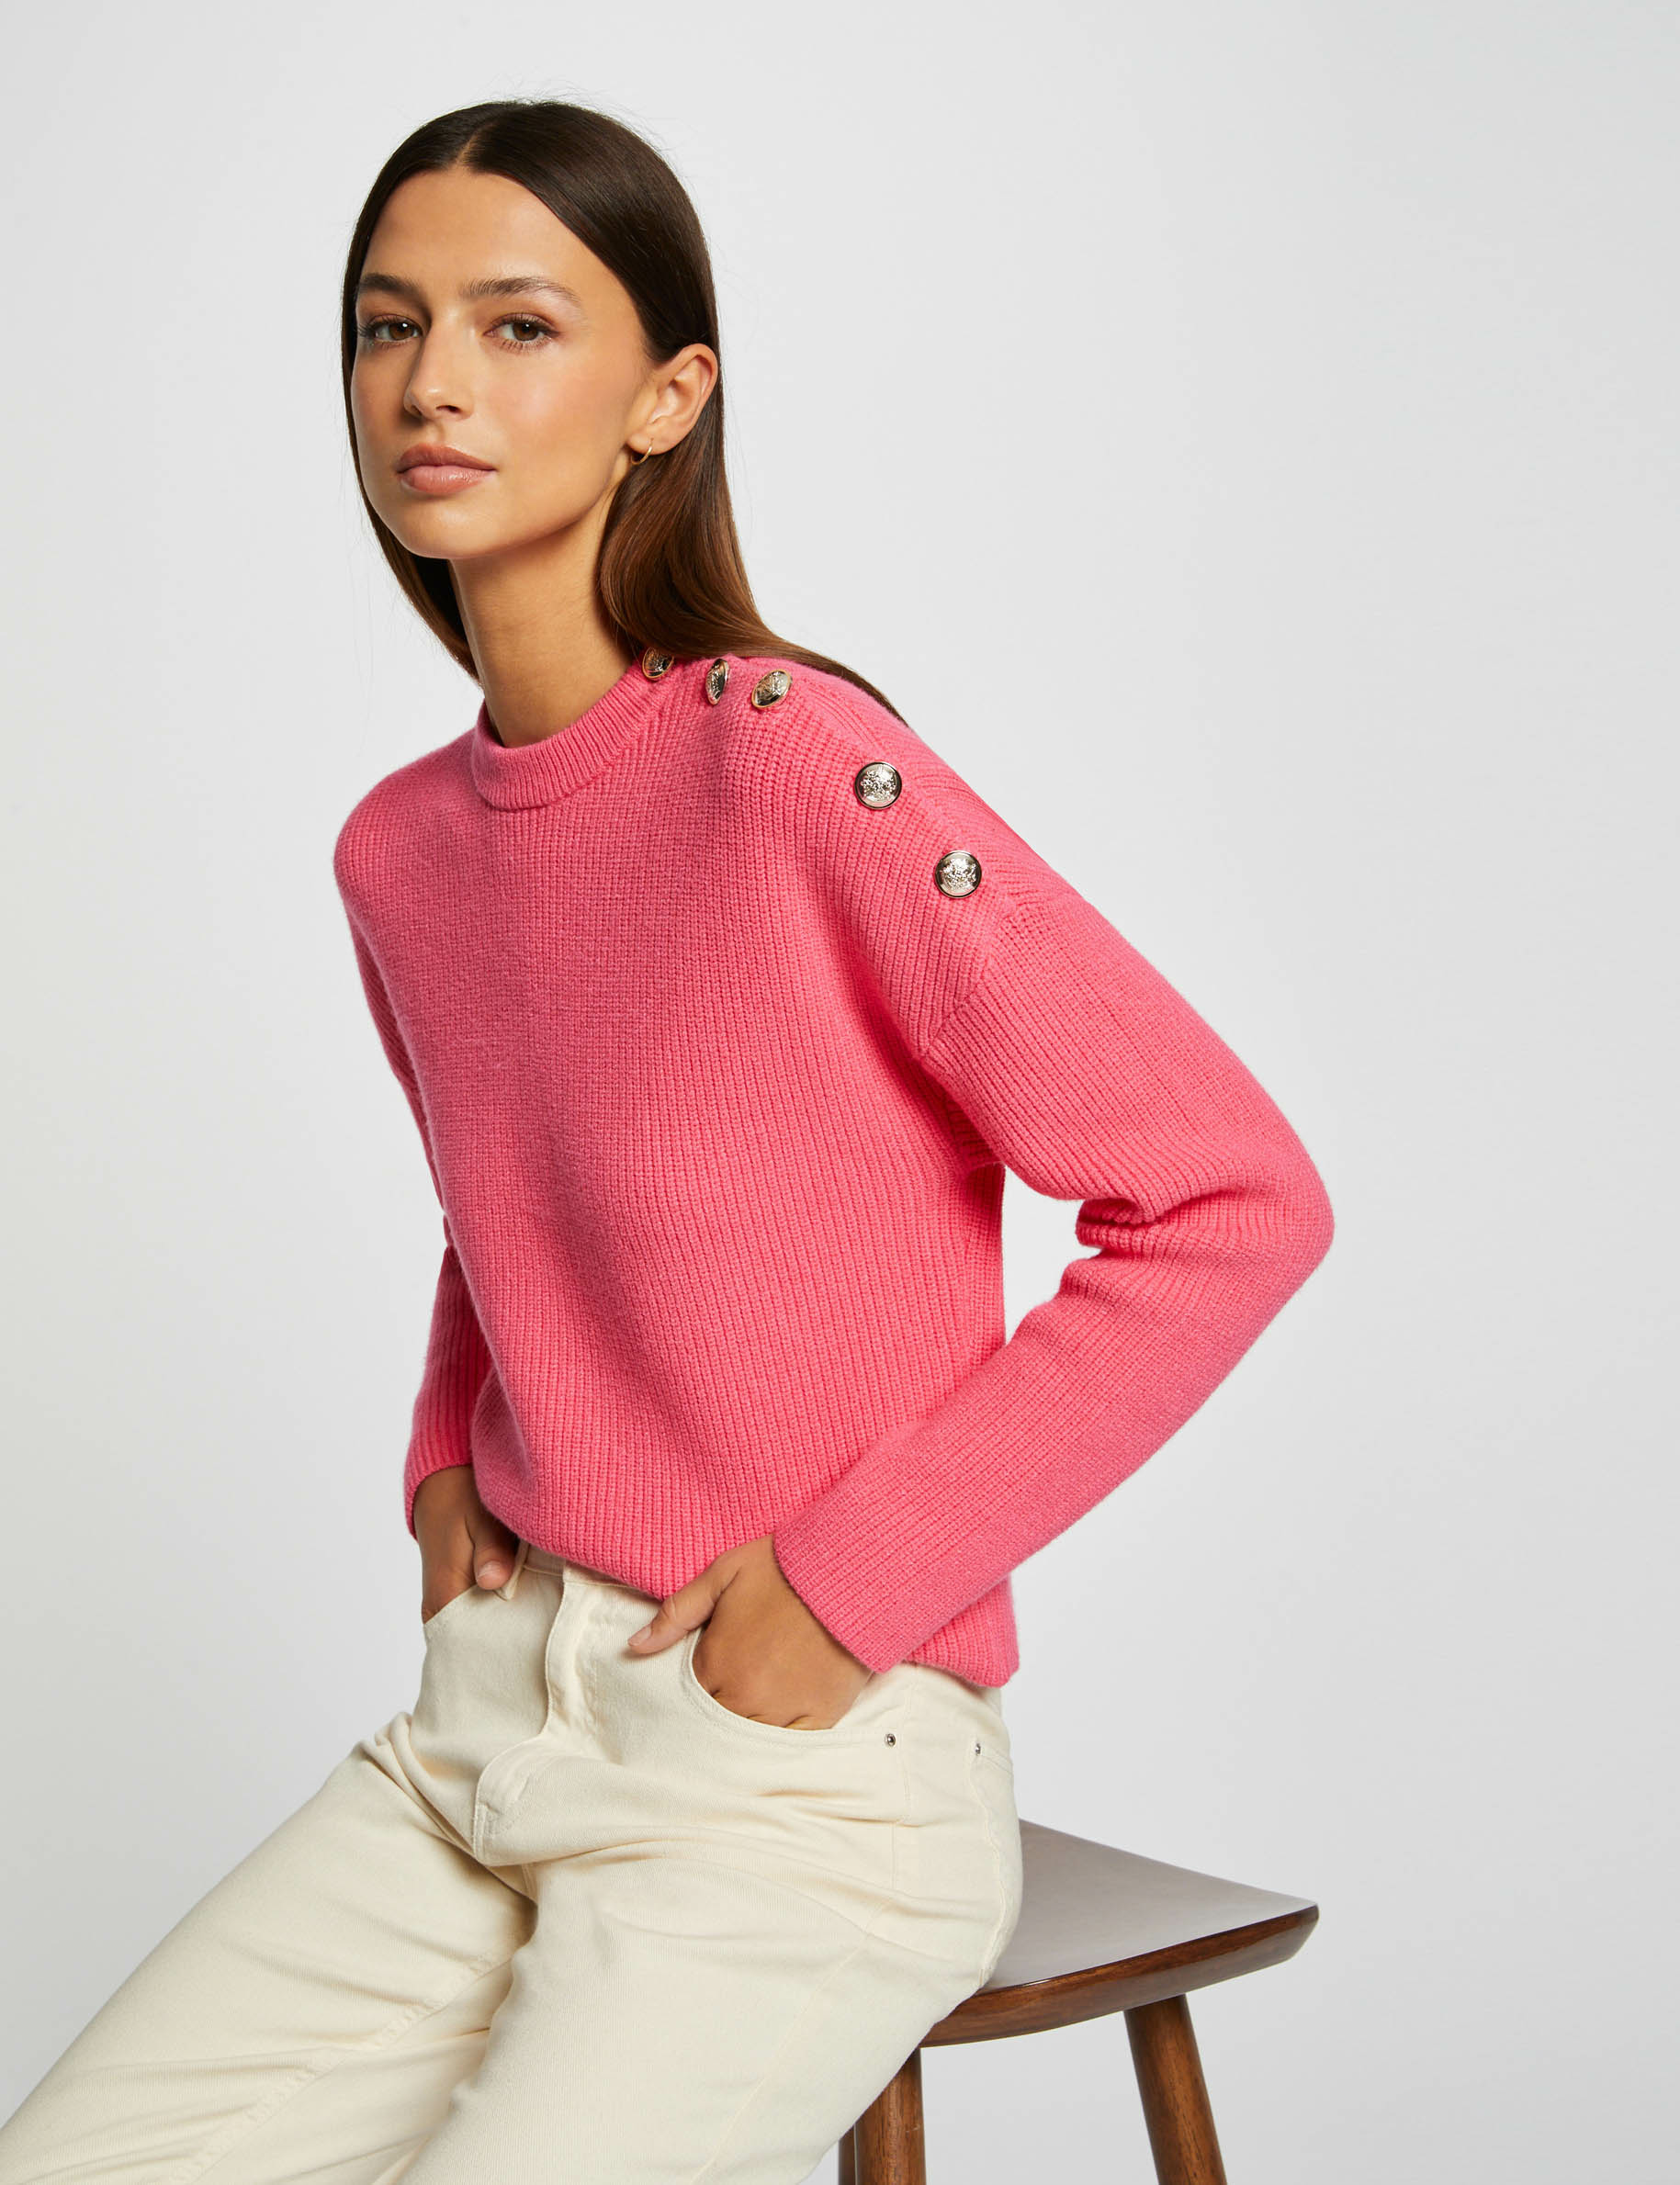 Pull manches longues avec boutons rose femme